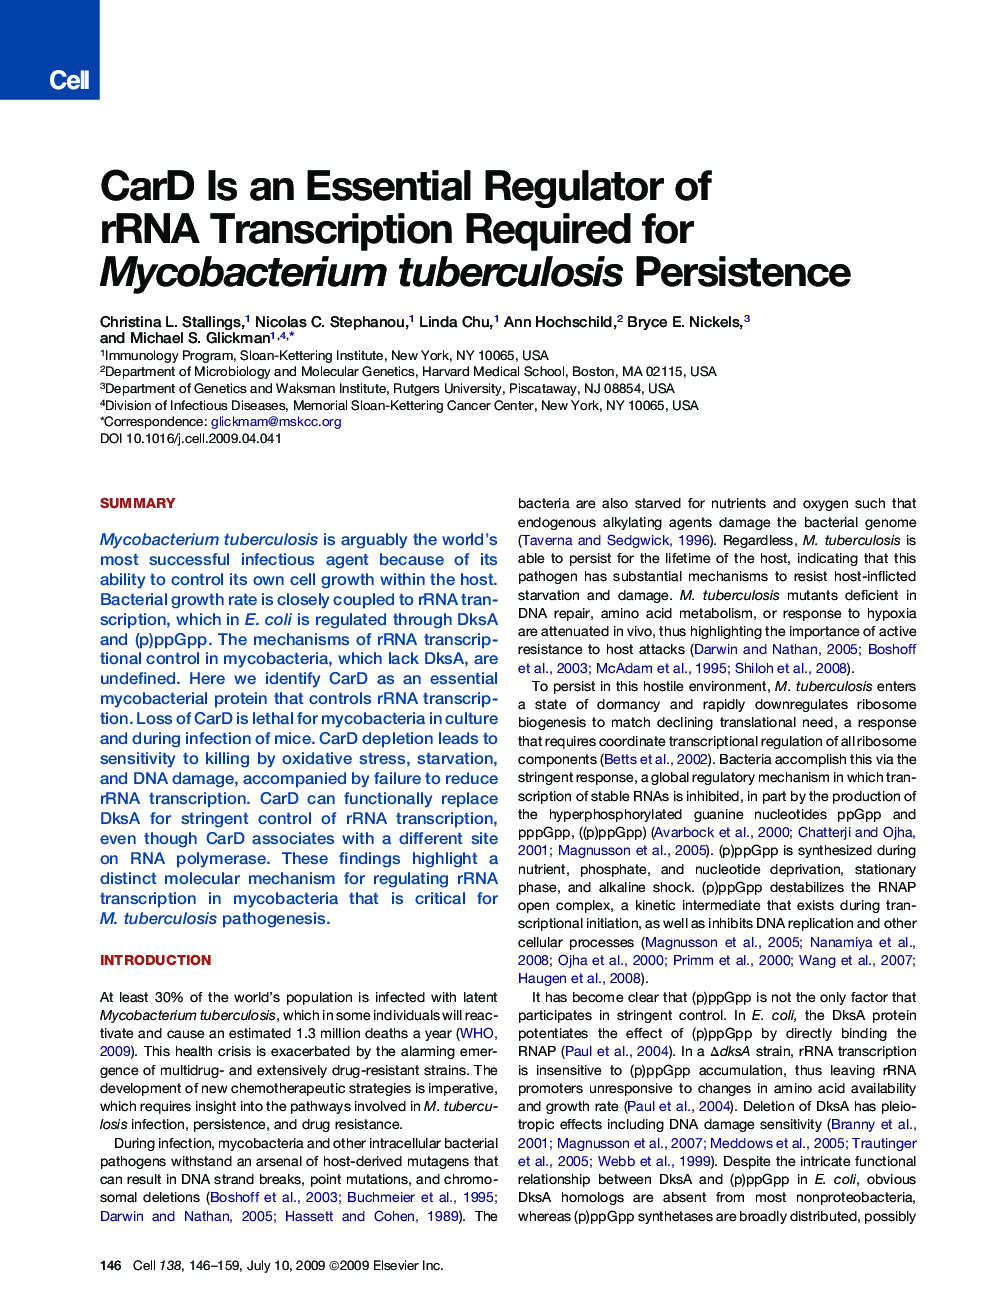 CarD Is an Essential Regulator of rRNA Transcription Required for Mycobacterium tuberculosis Persistence